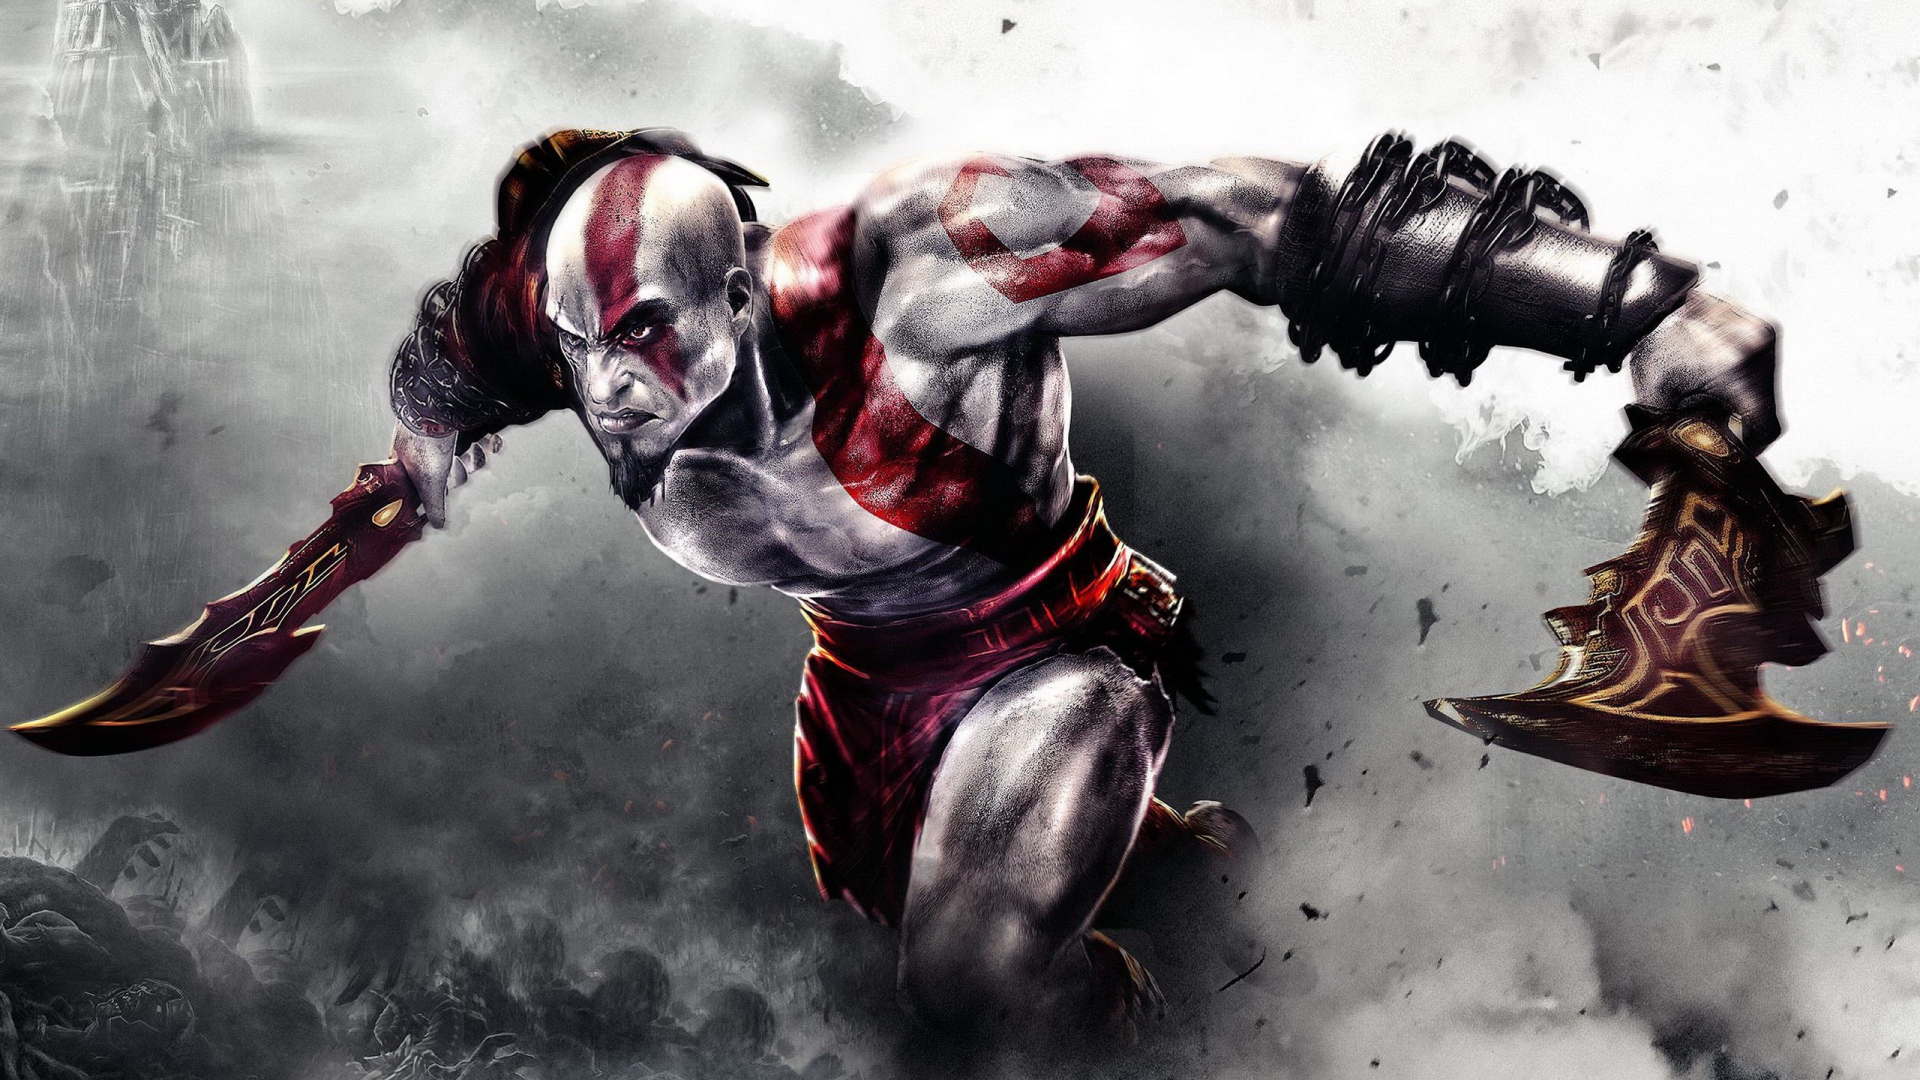 Angry Kratos for 1920 x 1080 HDTV 1080p resolution